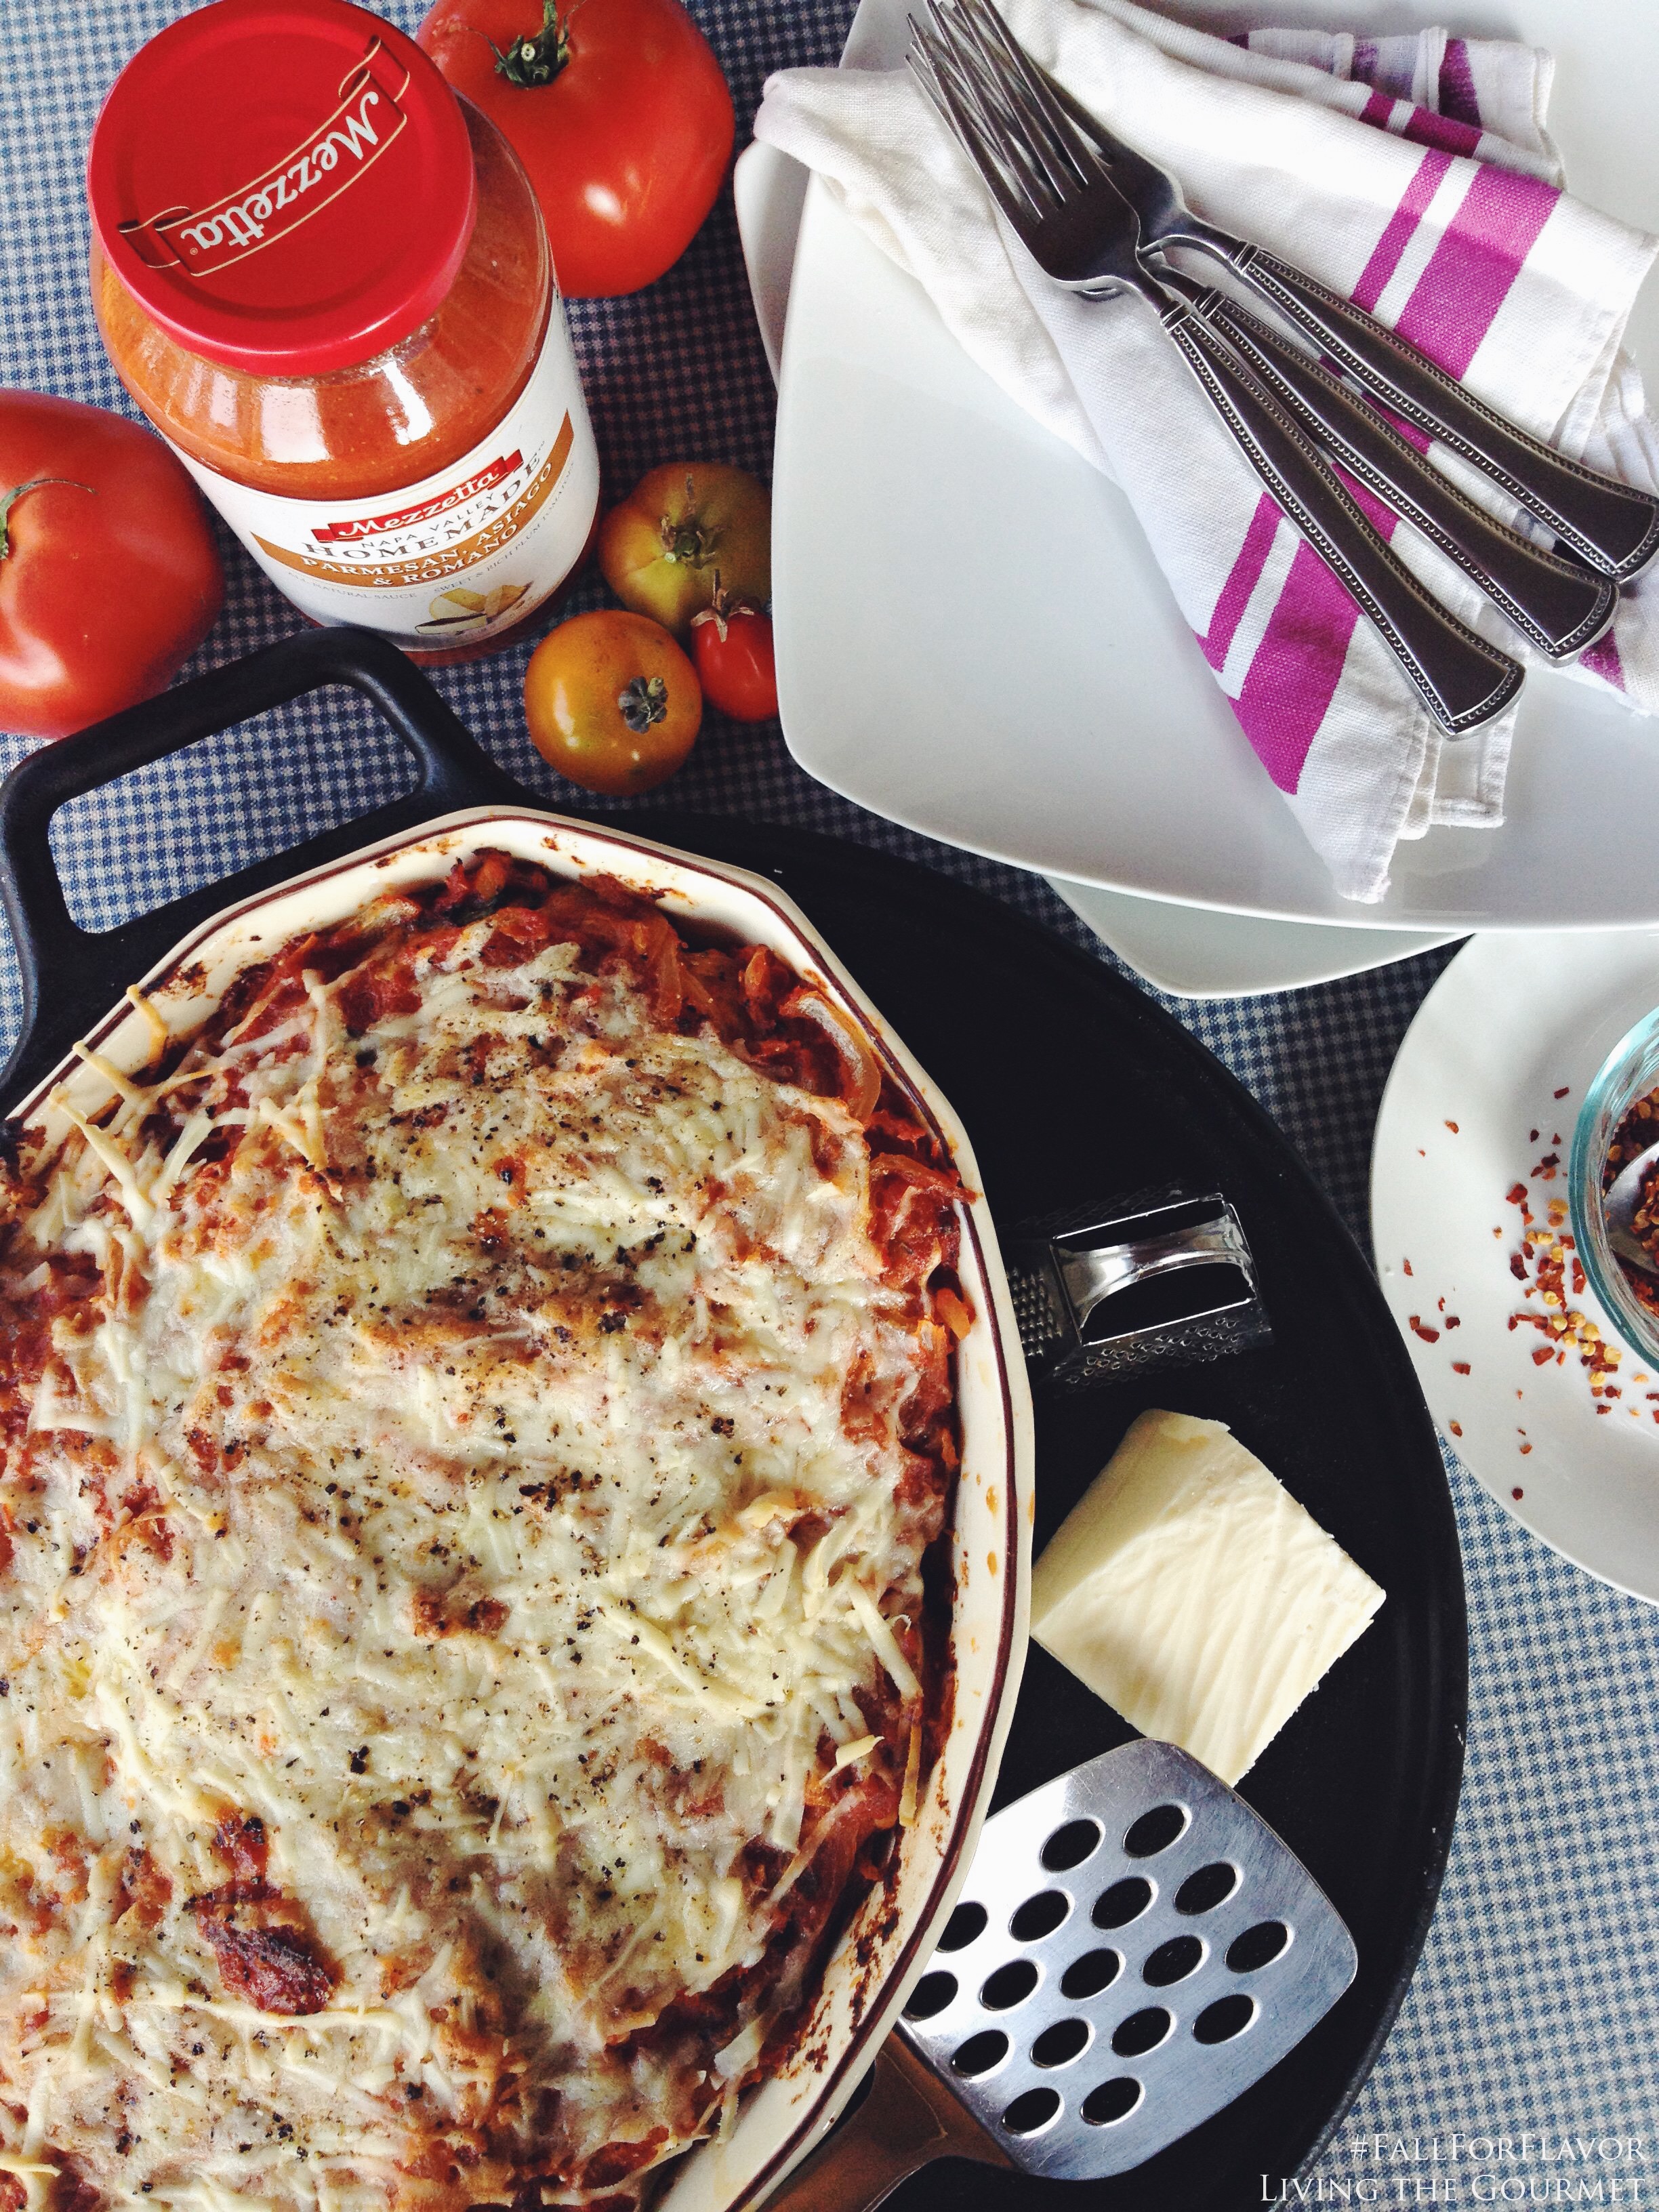 Living the Gourmet: Eggplant and Zucchini Parmesan PLUS $50 VISA Giveaway | #FallForFlavor #Ad